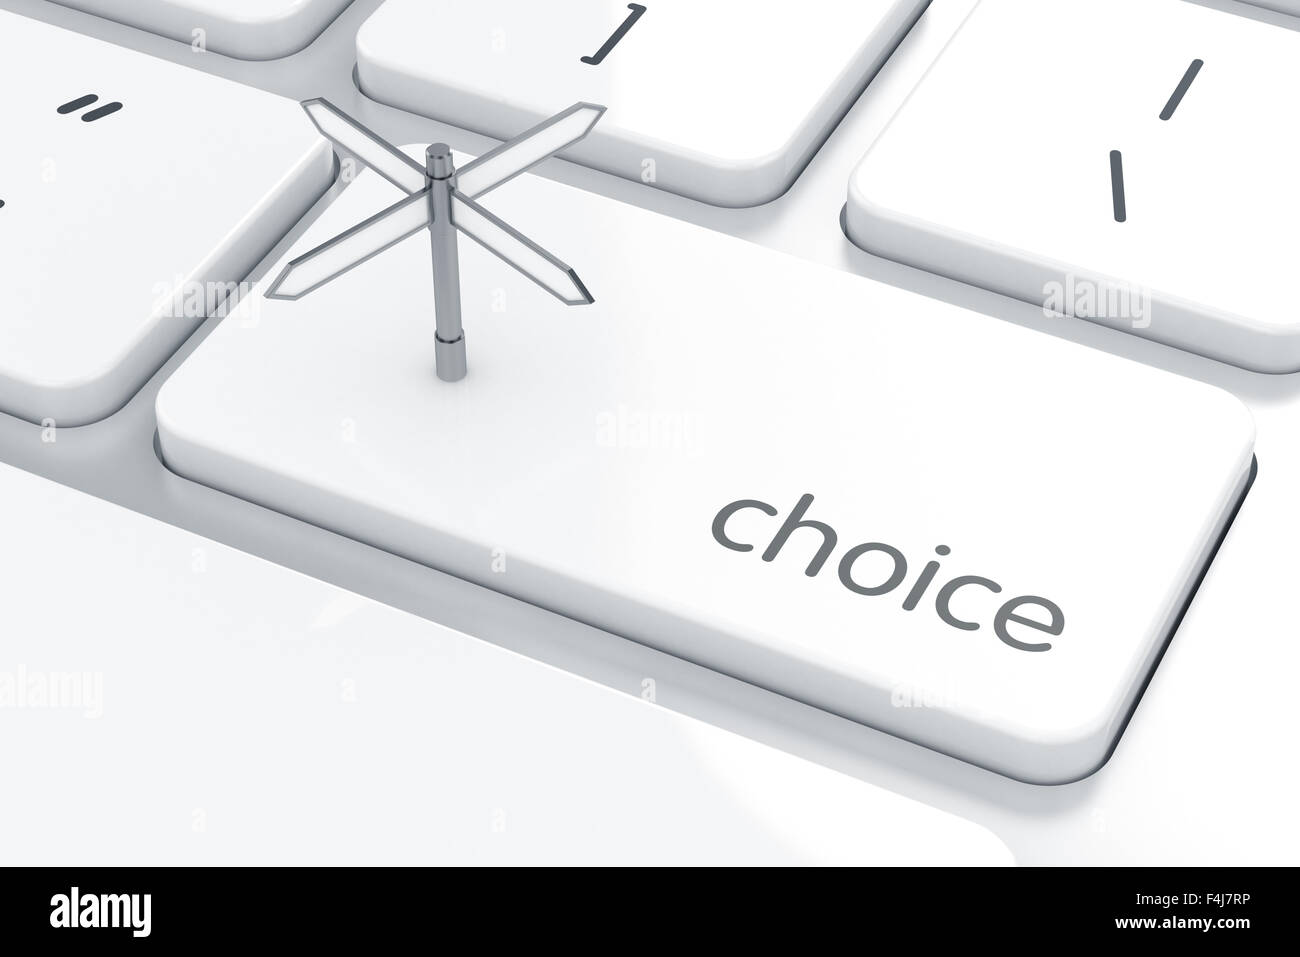 3d illustration of arrows road sign on the keyboard. Choice concept Stock Photo